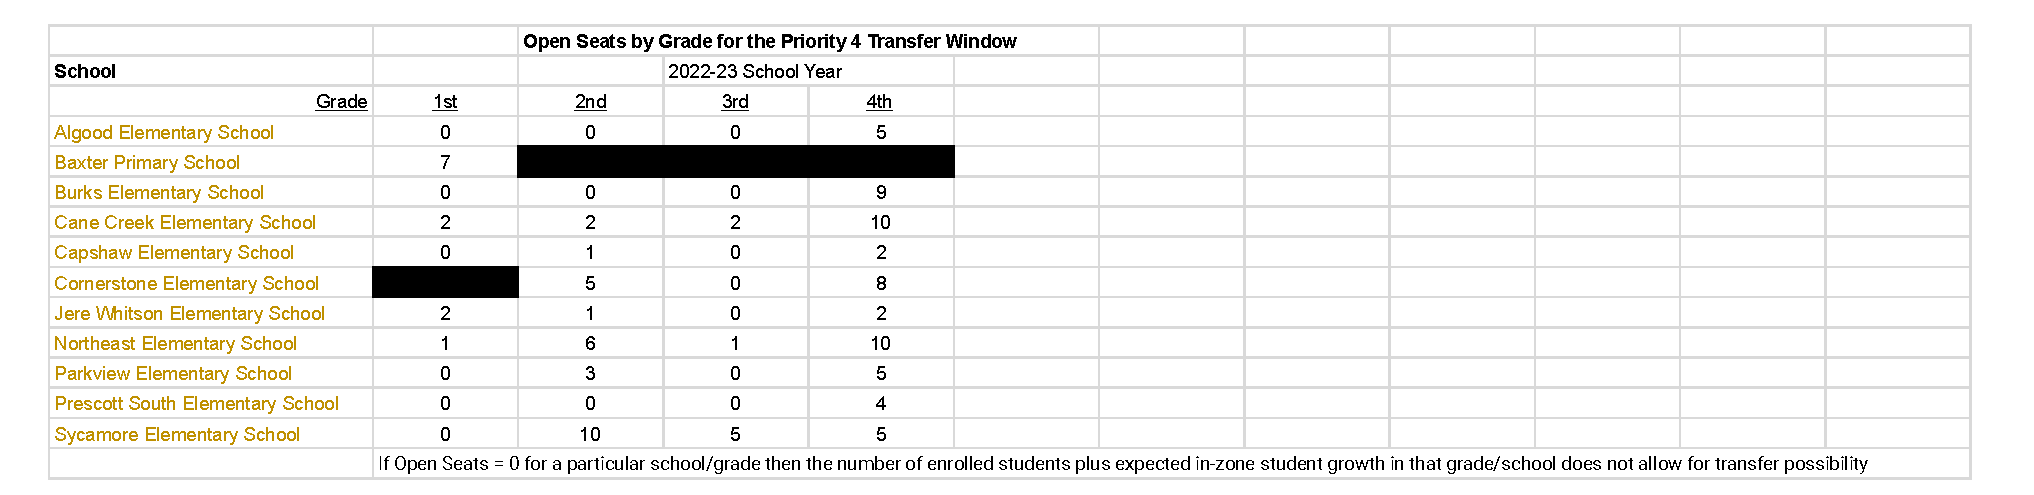 		Open Seats by Grade for the Priority 4 Transfer Window									 School			2022-23 School Year								 Grade	1st	2nd	3rd	4th							 Algood Elementary School	0	0	0	5							 Baxter Primary School	7	0	0	0							 Burks Elementary School	0	0	0	9							 Cane Creek Elementary School	2	2	2	10							 Capshaw Elementary School	0	1	0	2							 Cornerstone Elementary School	0	5	0	8							 Jere Whitson Elementary School	2	1	0	2							 Northeast Elementary School	1	6	1	10							 Parkview Elementary School	0	3	0	5							 Prescott South Elementary School	0	0	0	4							 Sycamore Elementary School	0	10	5	5							 	If Open Seats = 0 for a particular school/grade then the number of enrolled students plus expected in-zone student growth in that grade/school does not allow for transfer possibility										